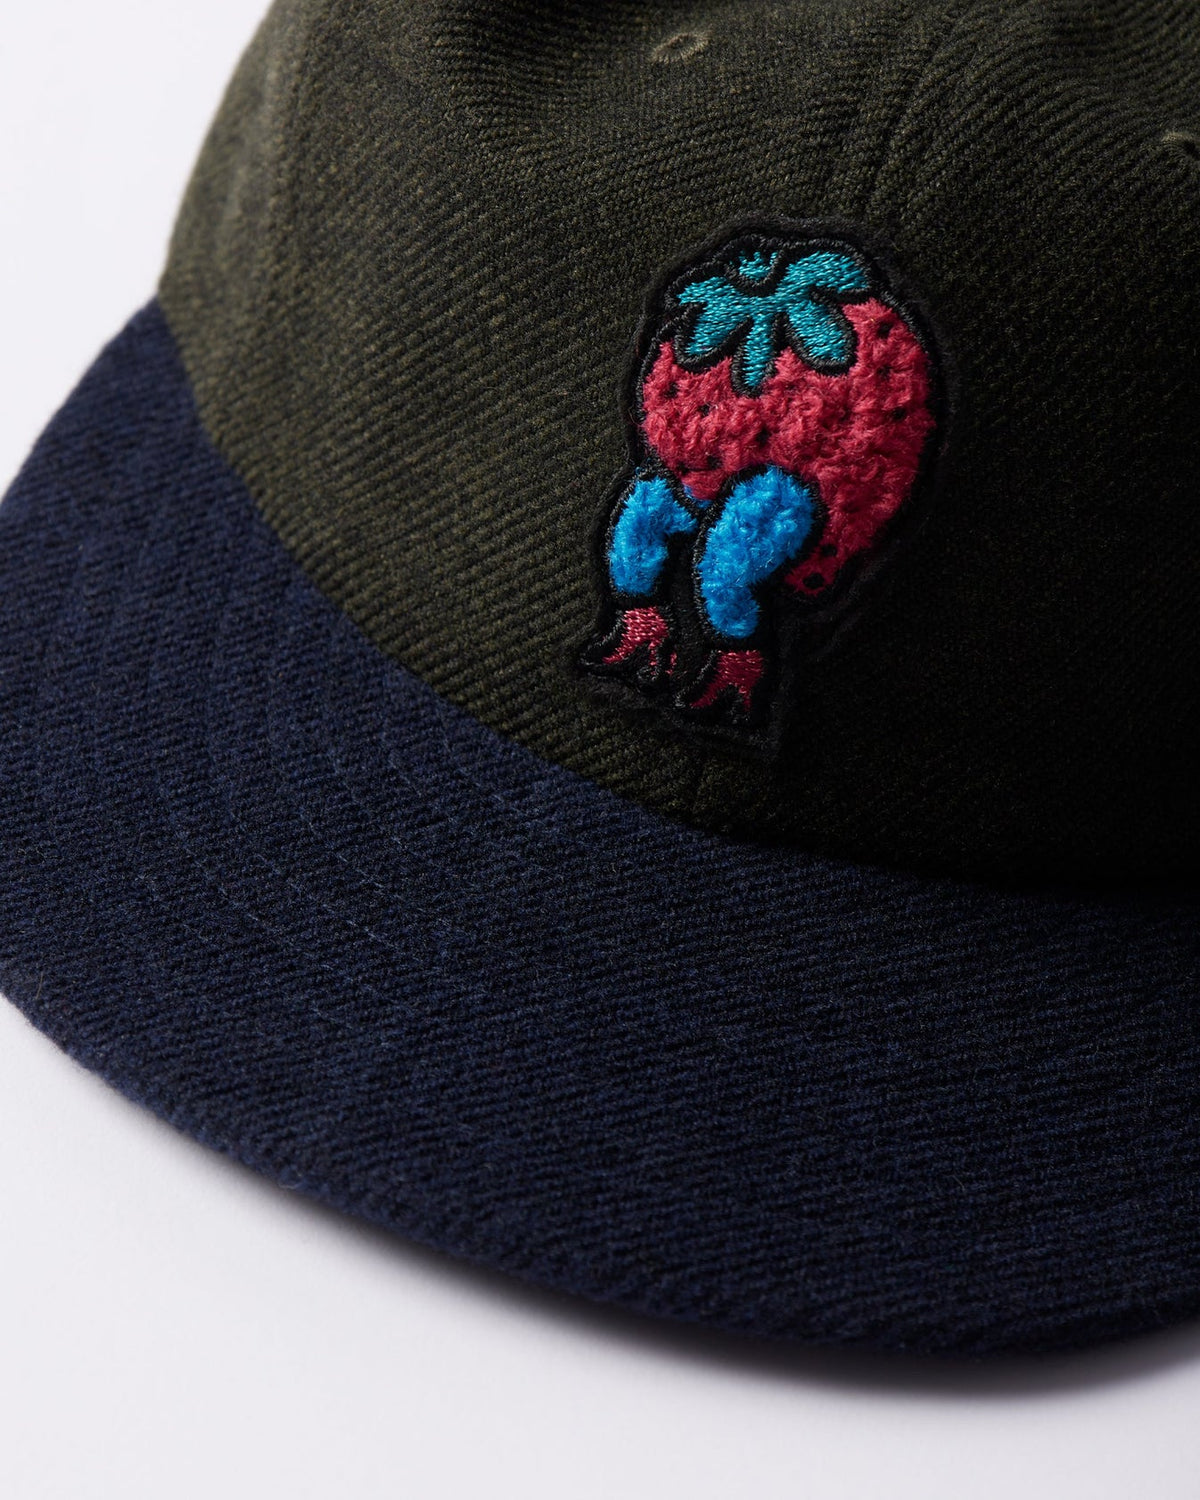 BY PARRA STUPID STRAWBERRY 6 PANEL HAT